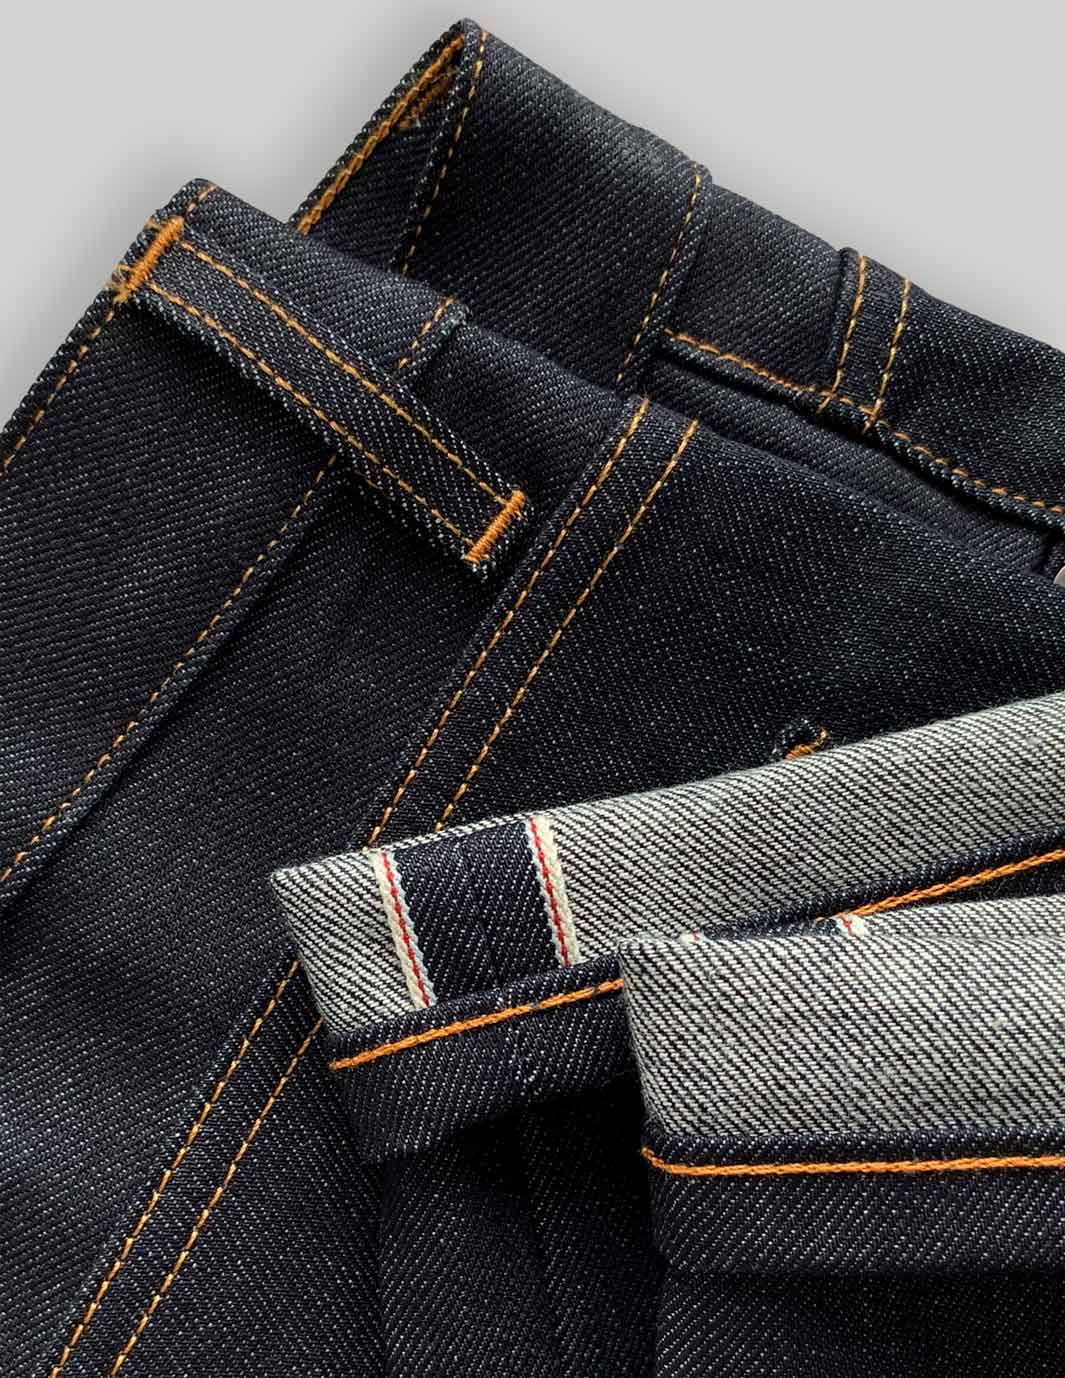 Organic Raw Denim Jeans - Premium Denim Jeans from OURVER - Just £50! Shop now at OURVER